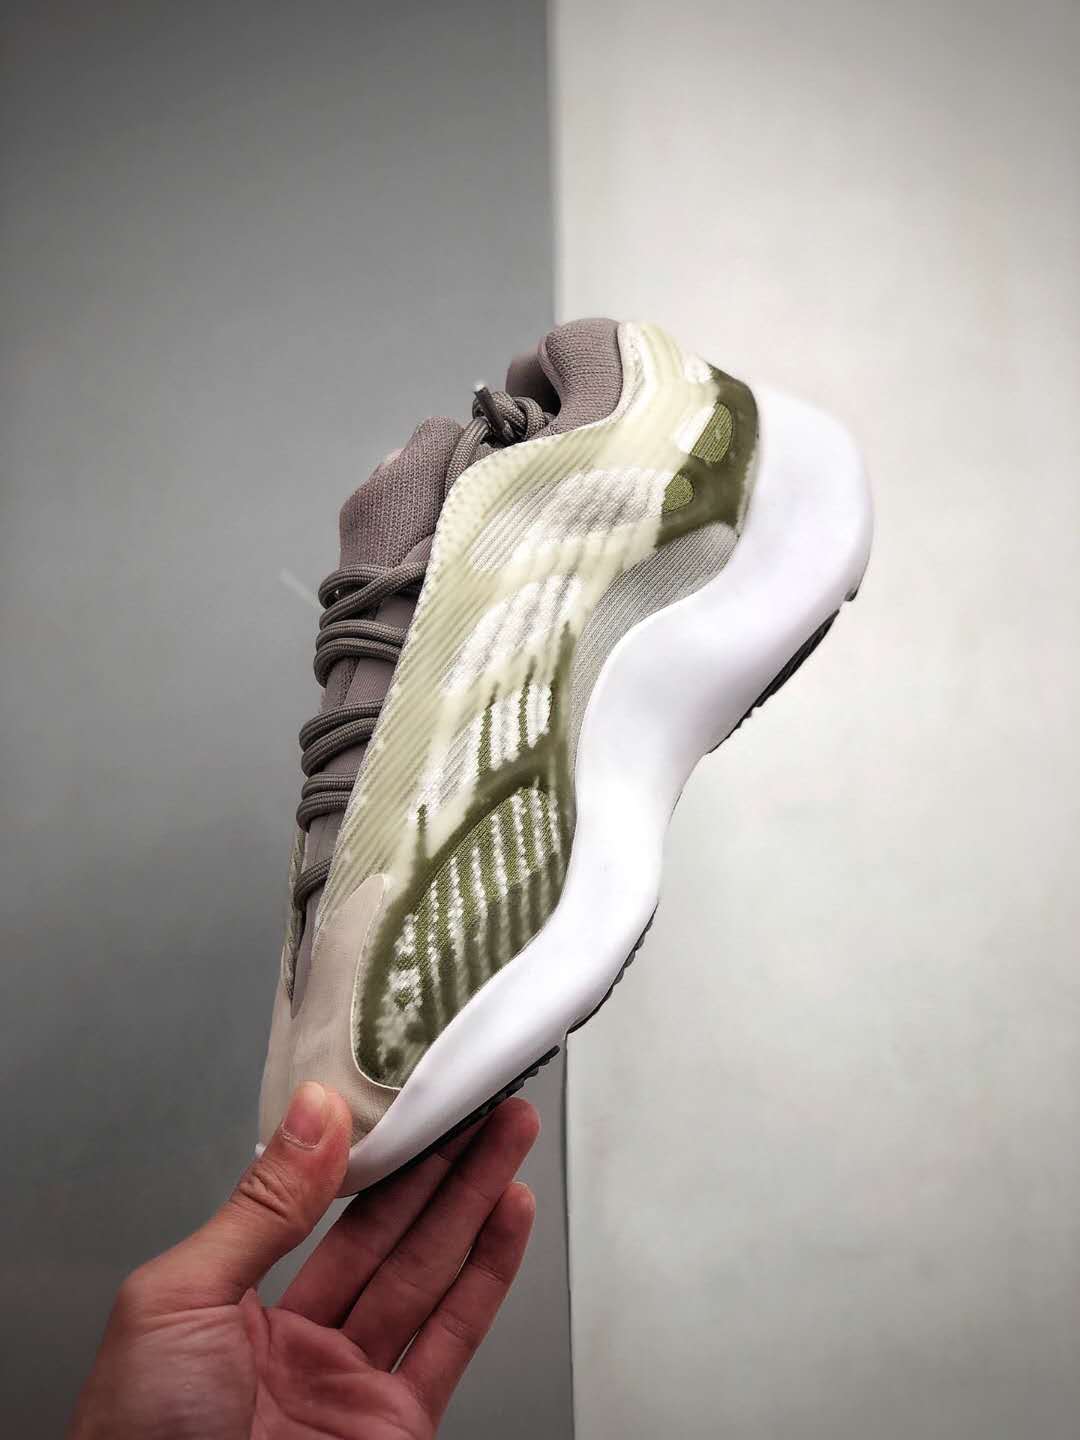 Adidas Yeezy Foam Runner Boost 700 V3 EF9899 - Shop the Latest Release Today!